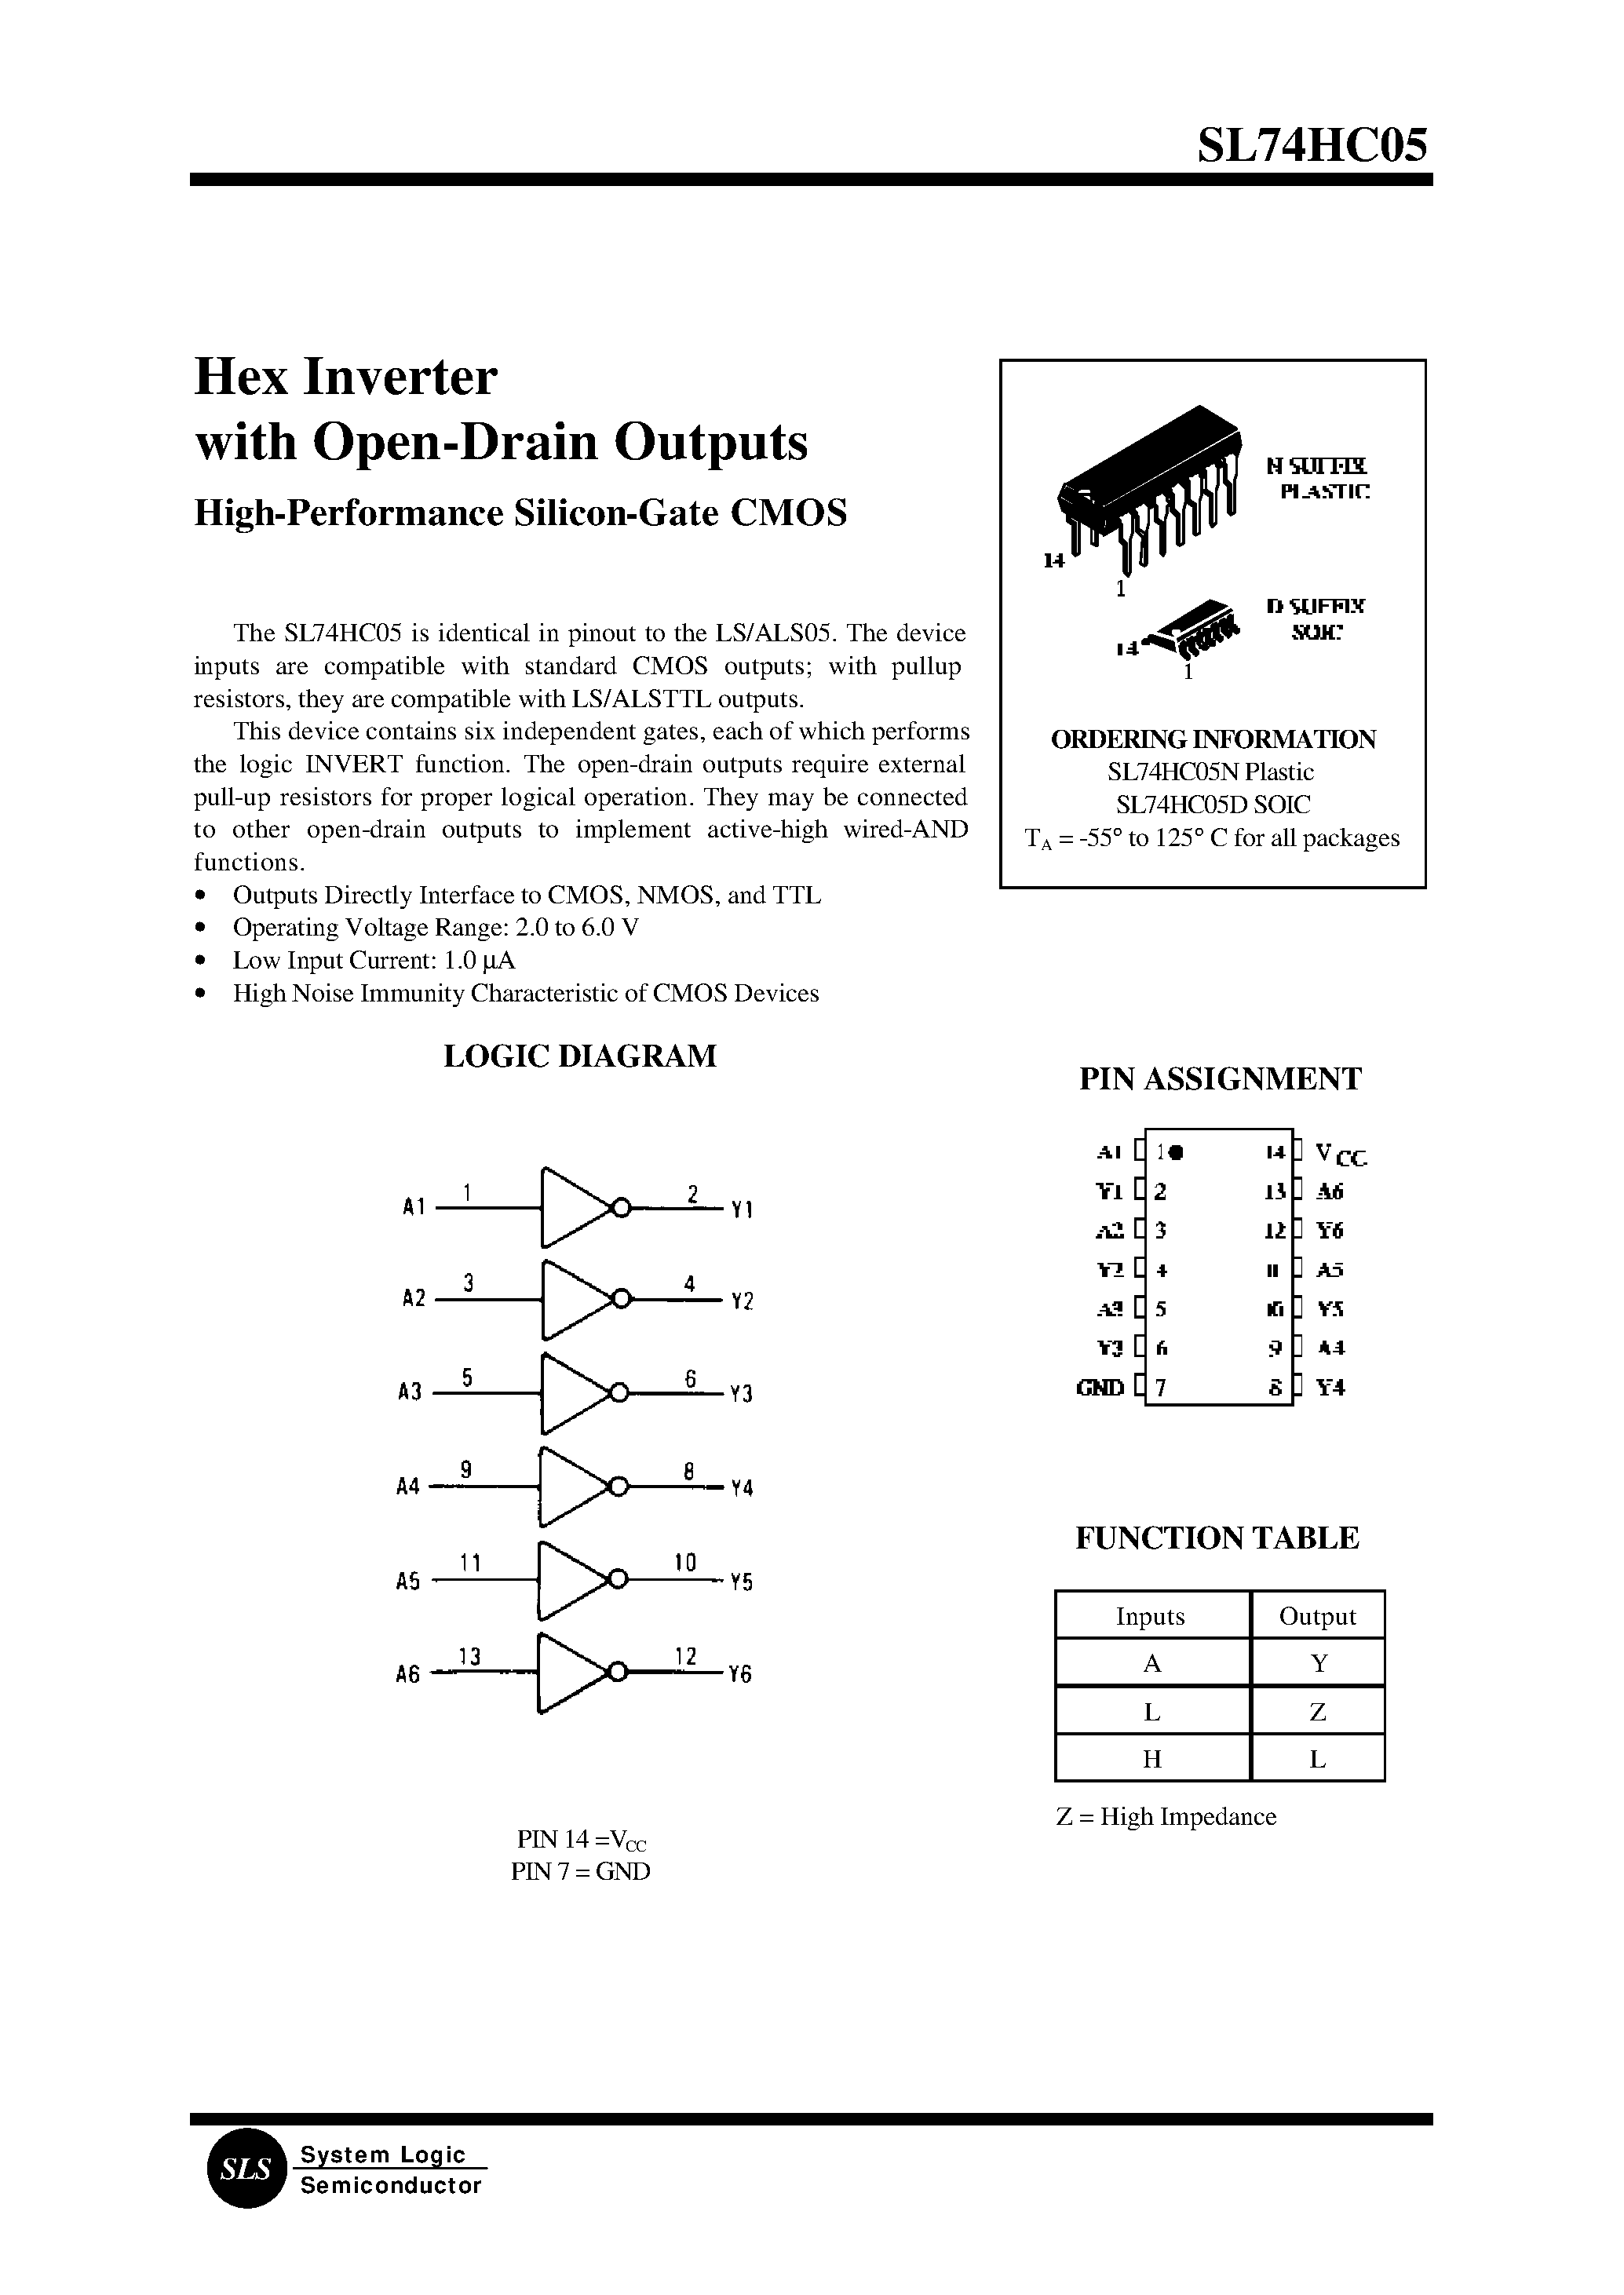 Datasheet 74HC05 - Hex Inverter with Open-Drain Outputs page 1